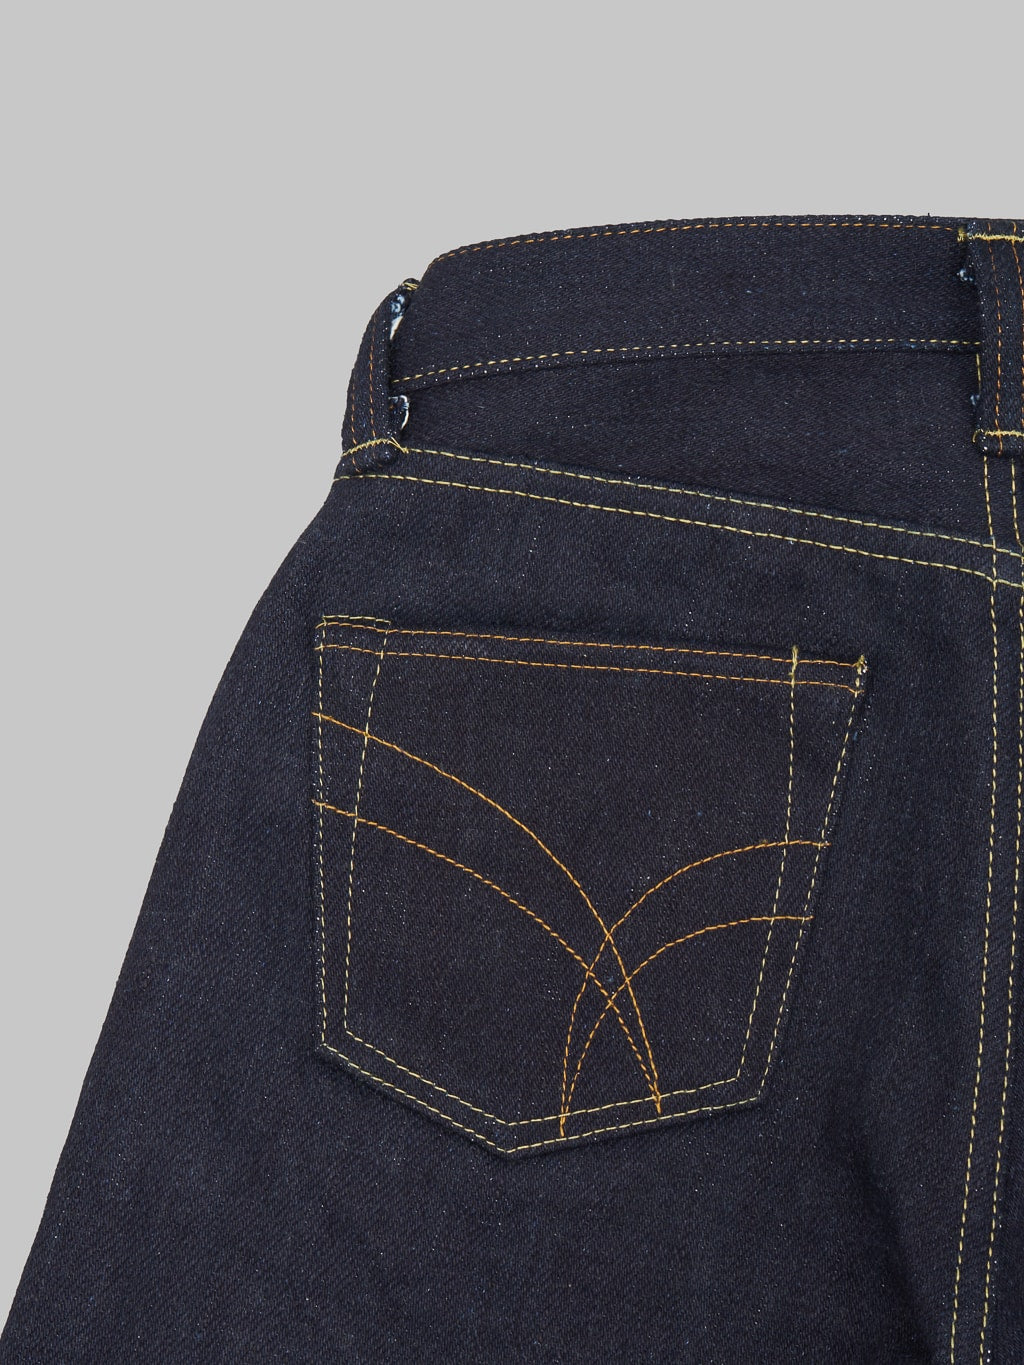 The Strike Gold Extra Heavyweight regular straight jeans texture